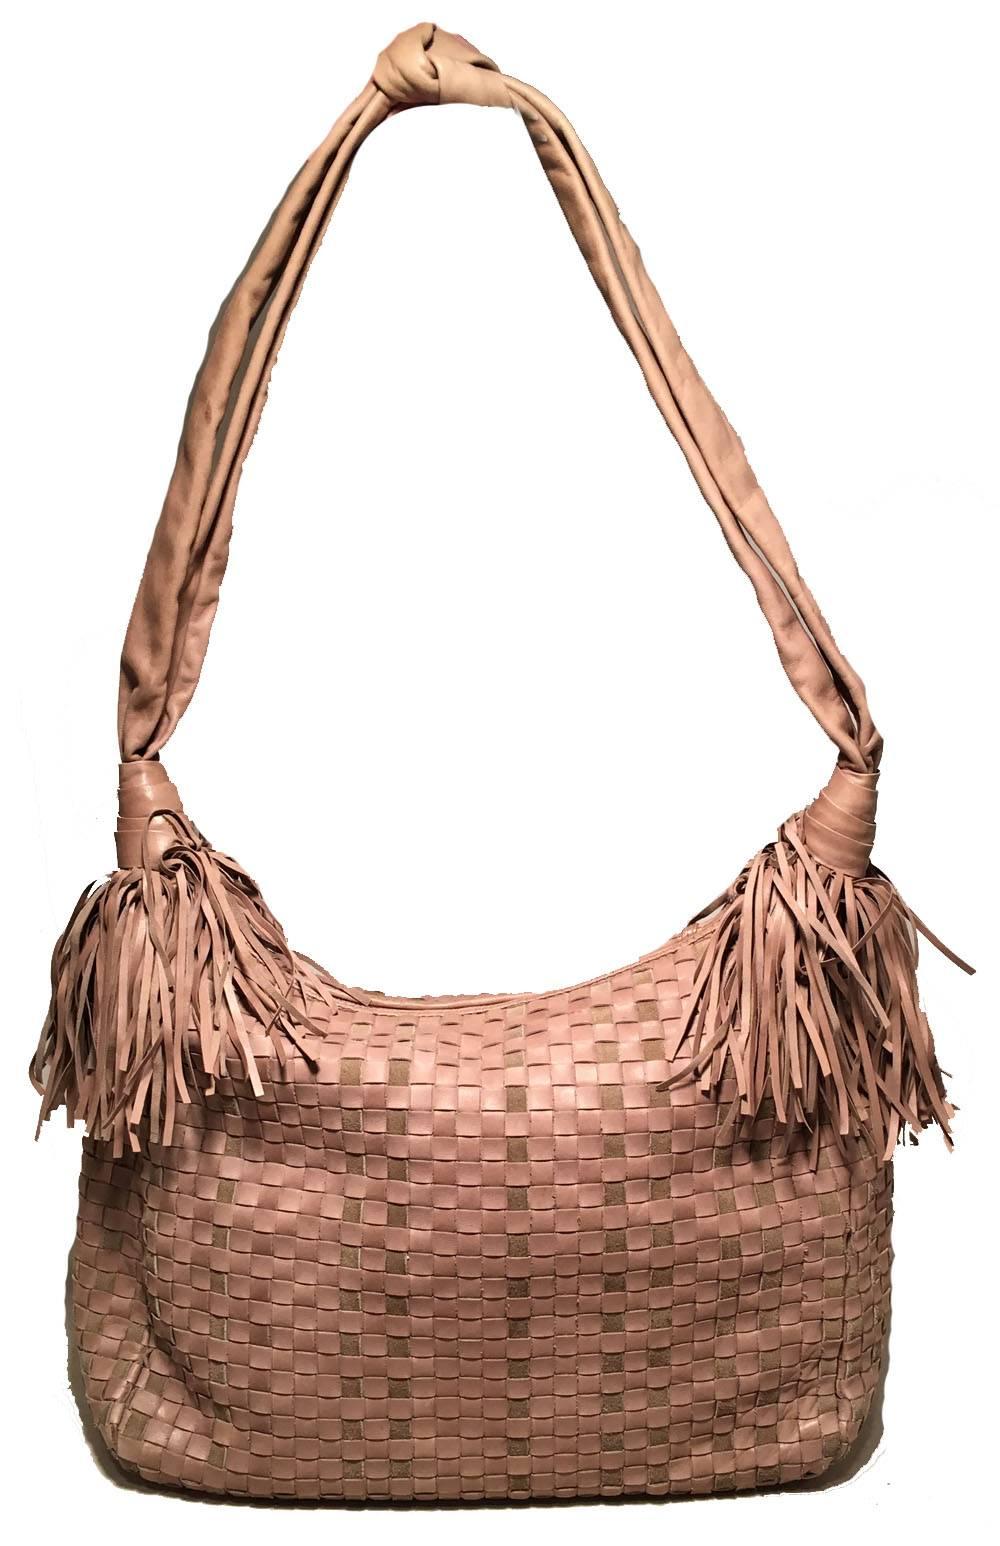 rare Bottega Veneta Vintage Tan Woven Leather Fringe Trim Shoulder Bag in excellent condition.  Tan signature woven leather exterior trimmed with a soft leather shoulder strap with knot at shoulder and tan leather fringe at both ends of strap.  Top